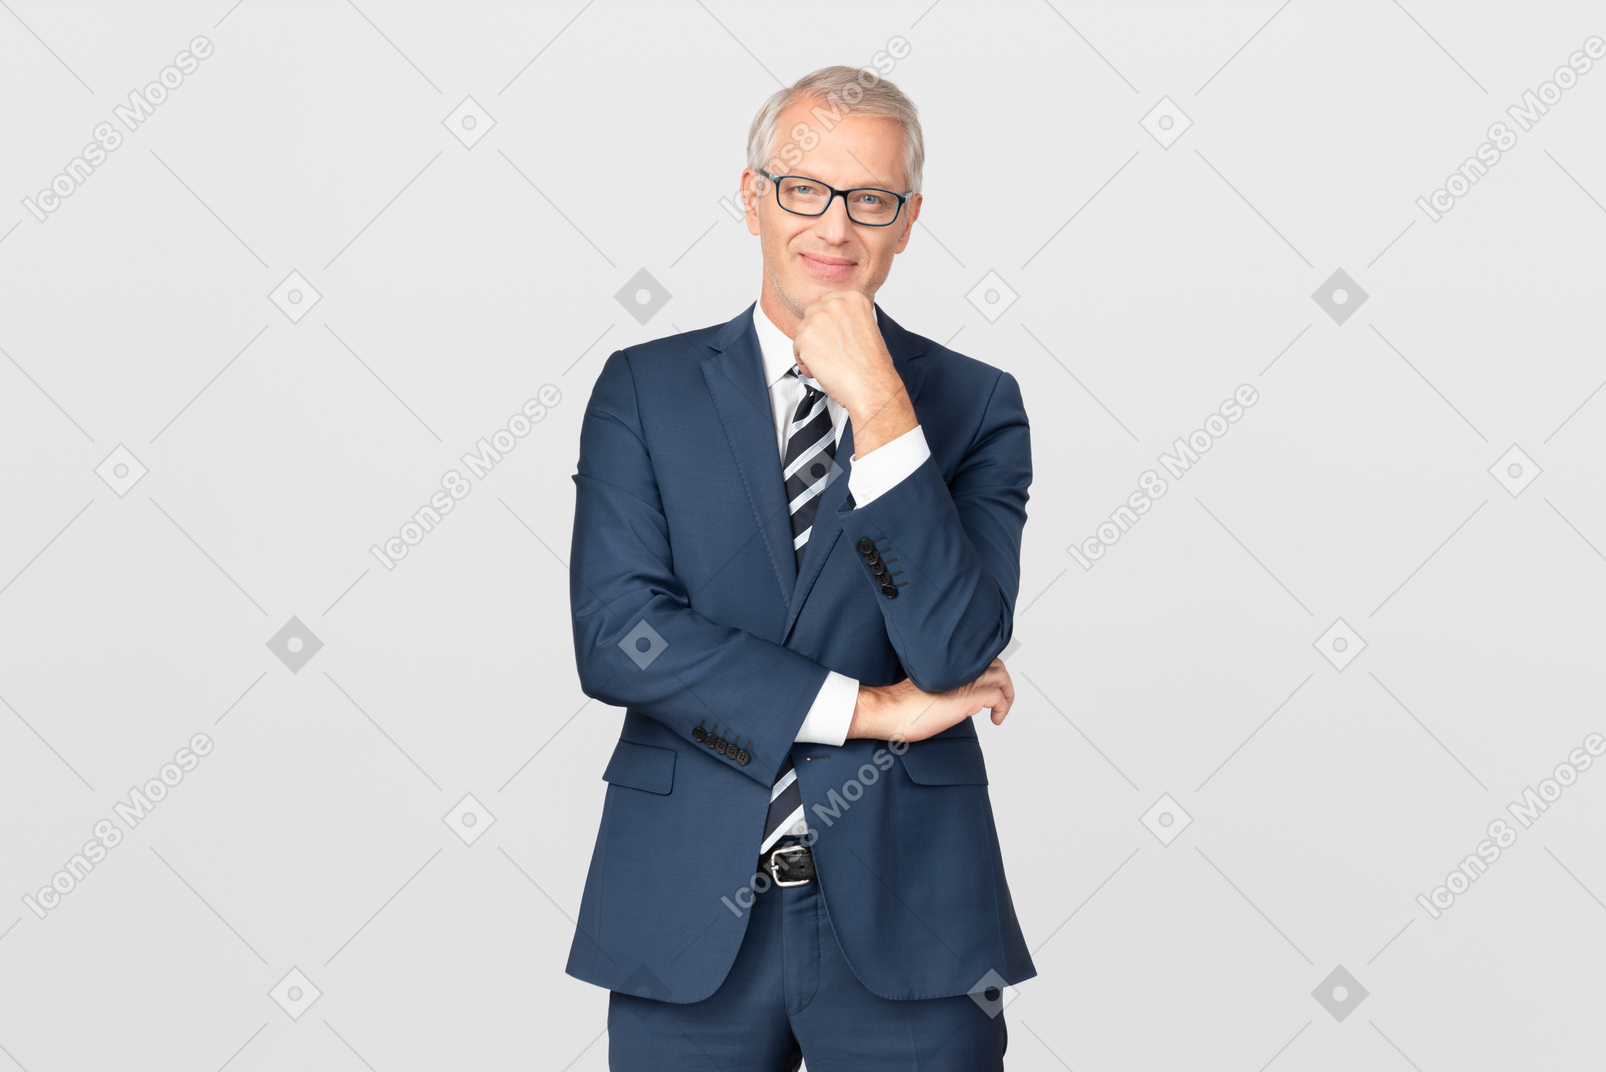 Mature businessman leaning his chin on hand